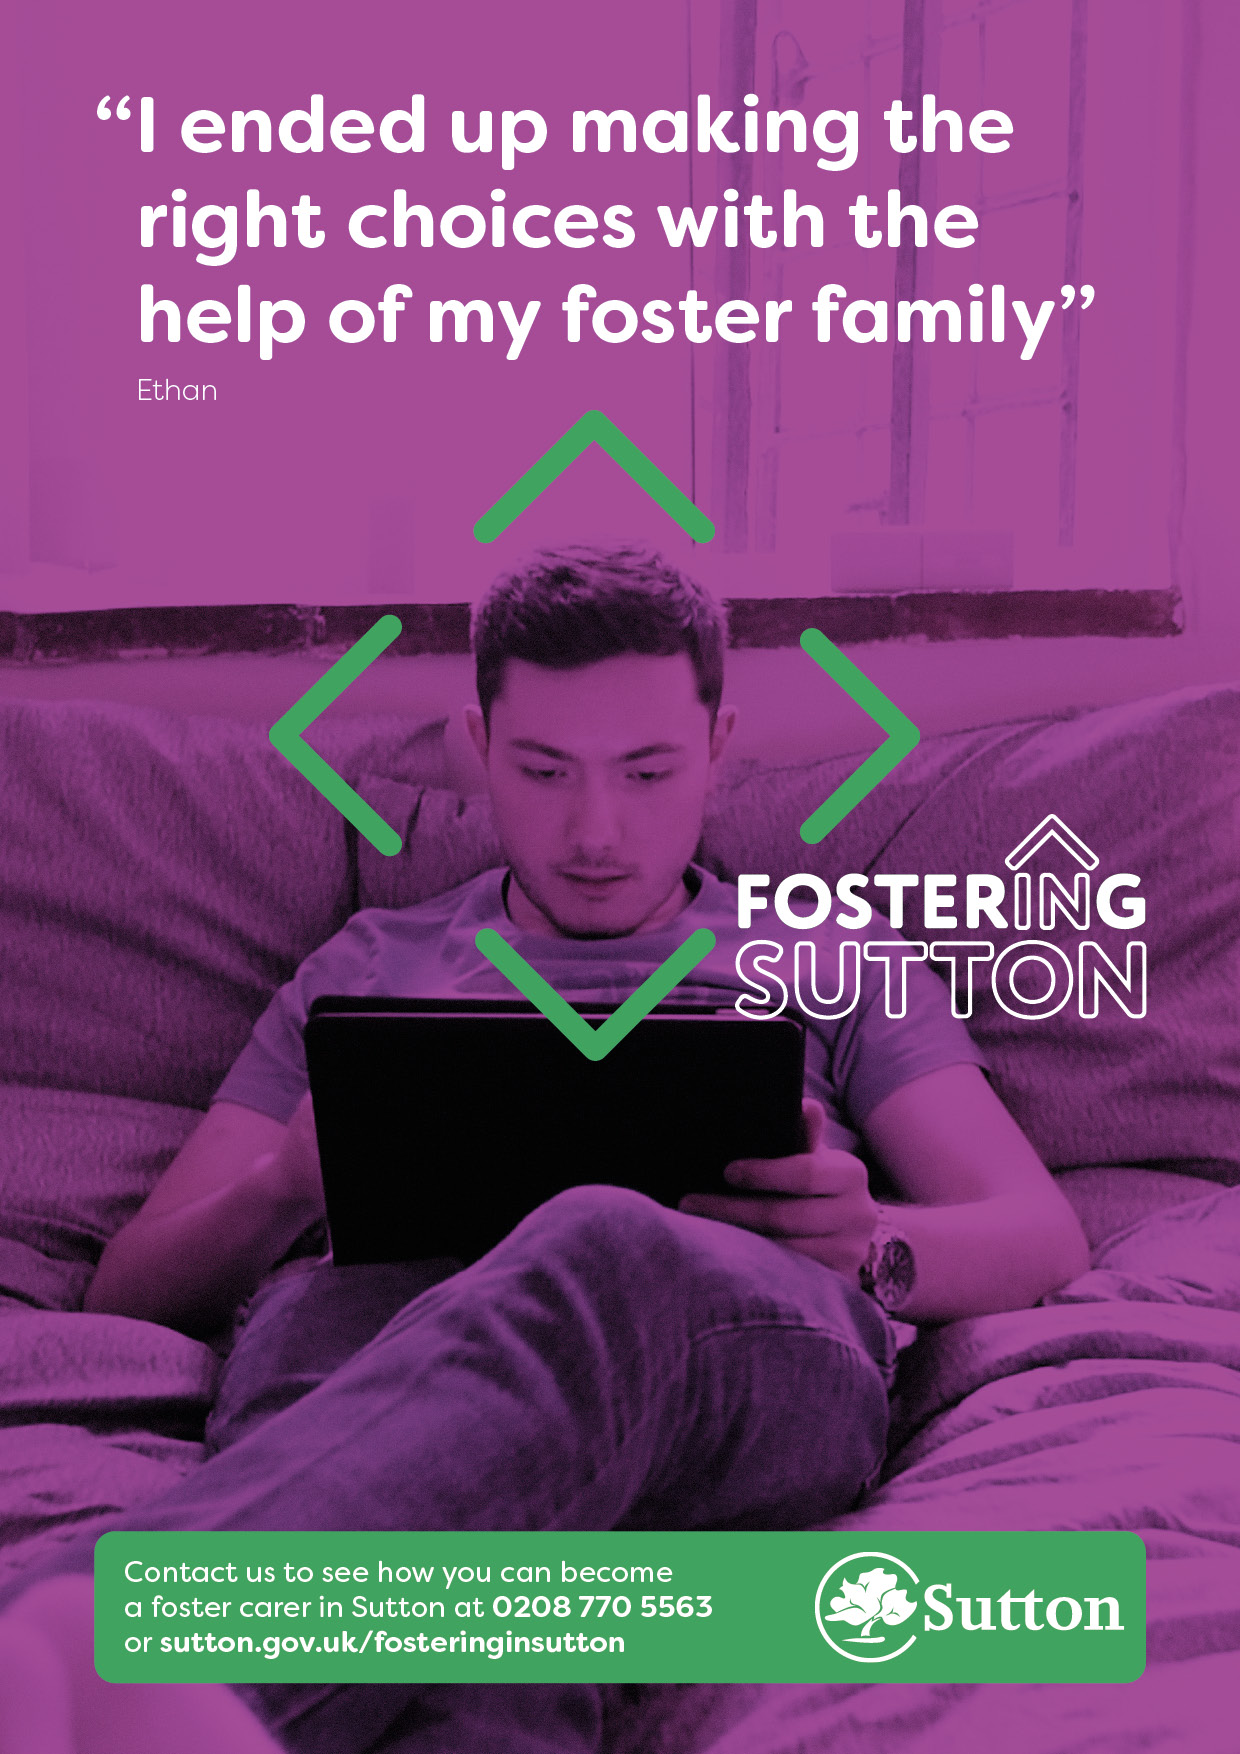 32_27 - SUT_Sutton Foster Carers Recruitment Campaign Phase 2_A4_Poster_quote_AW